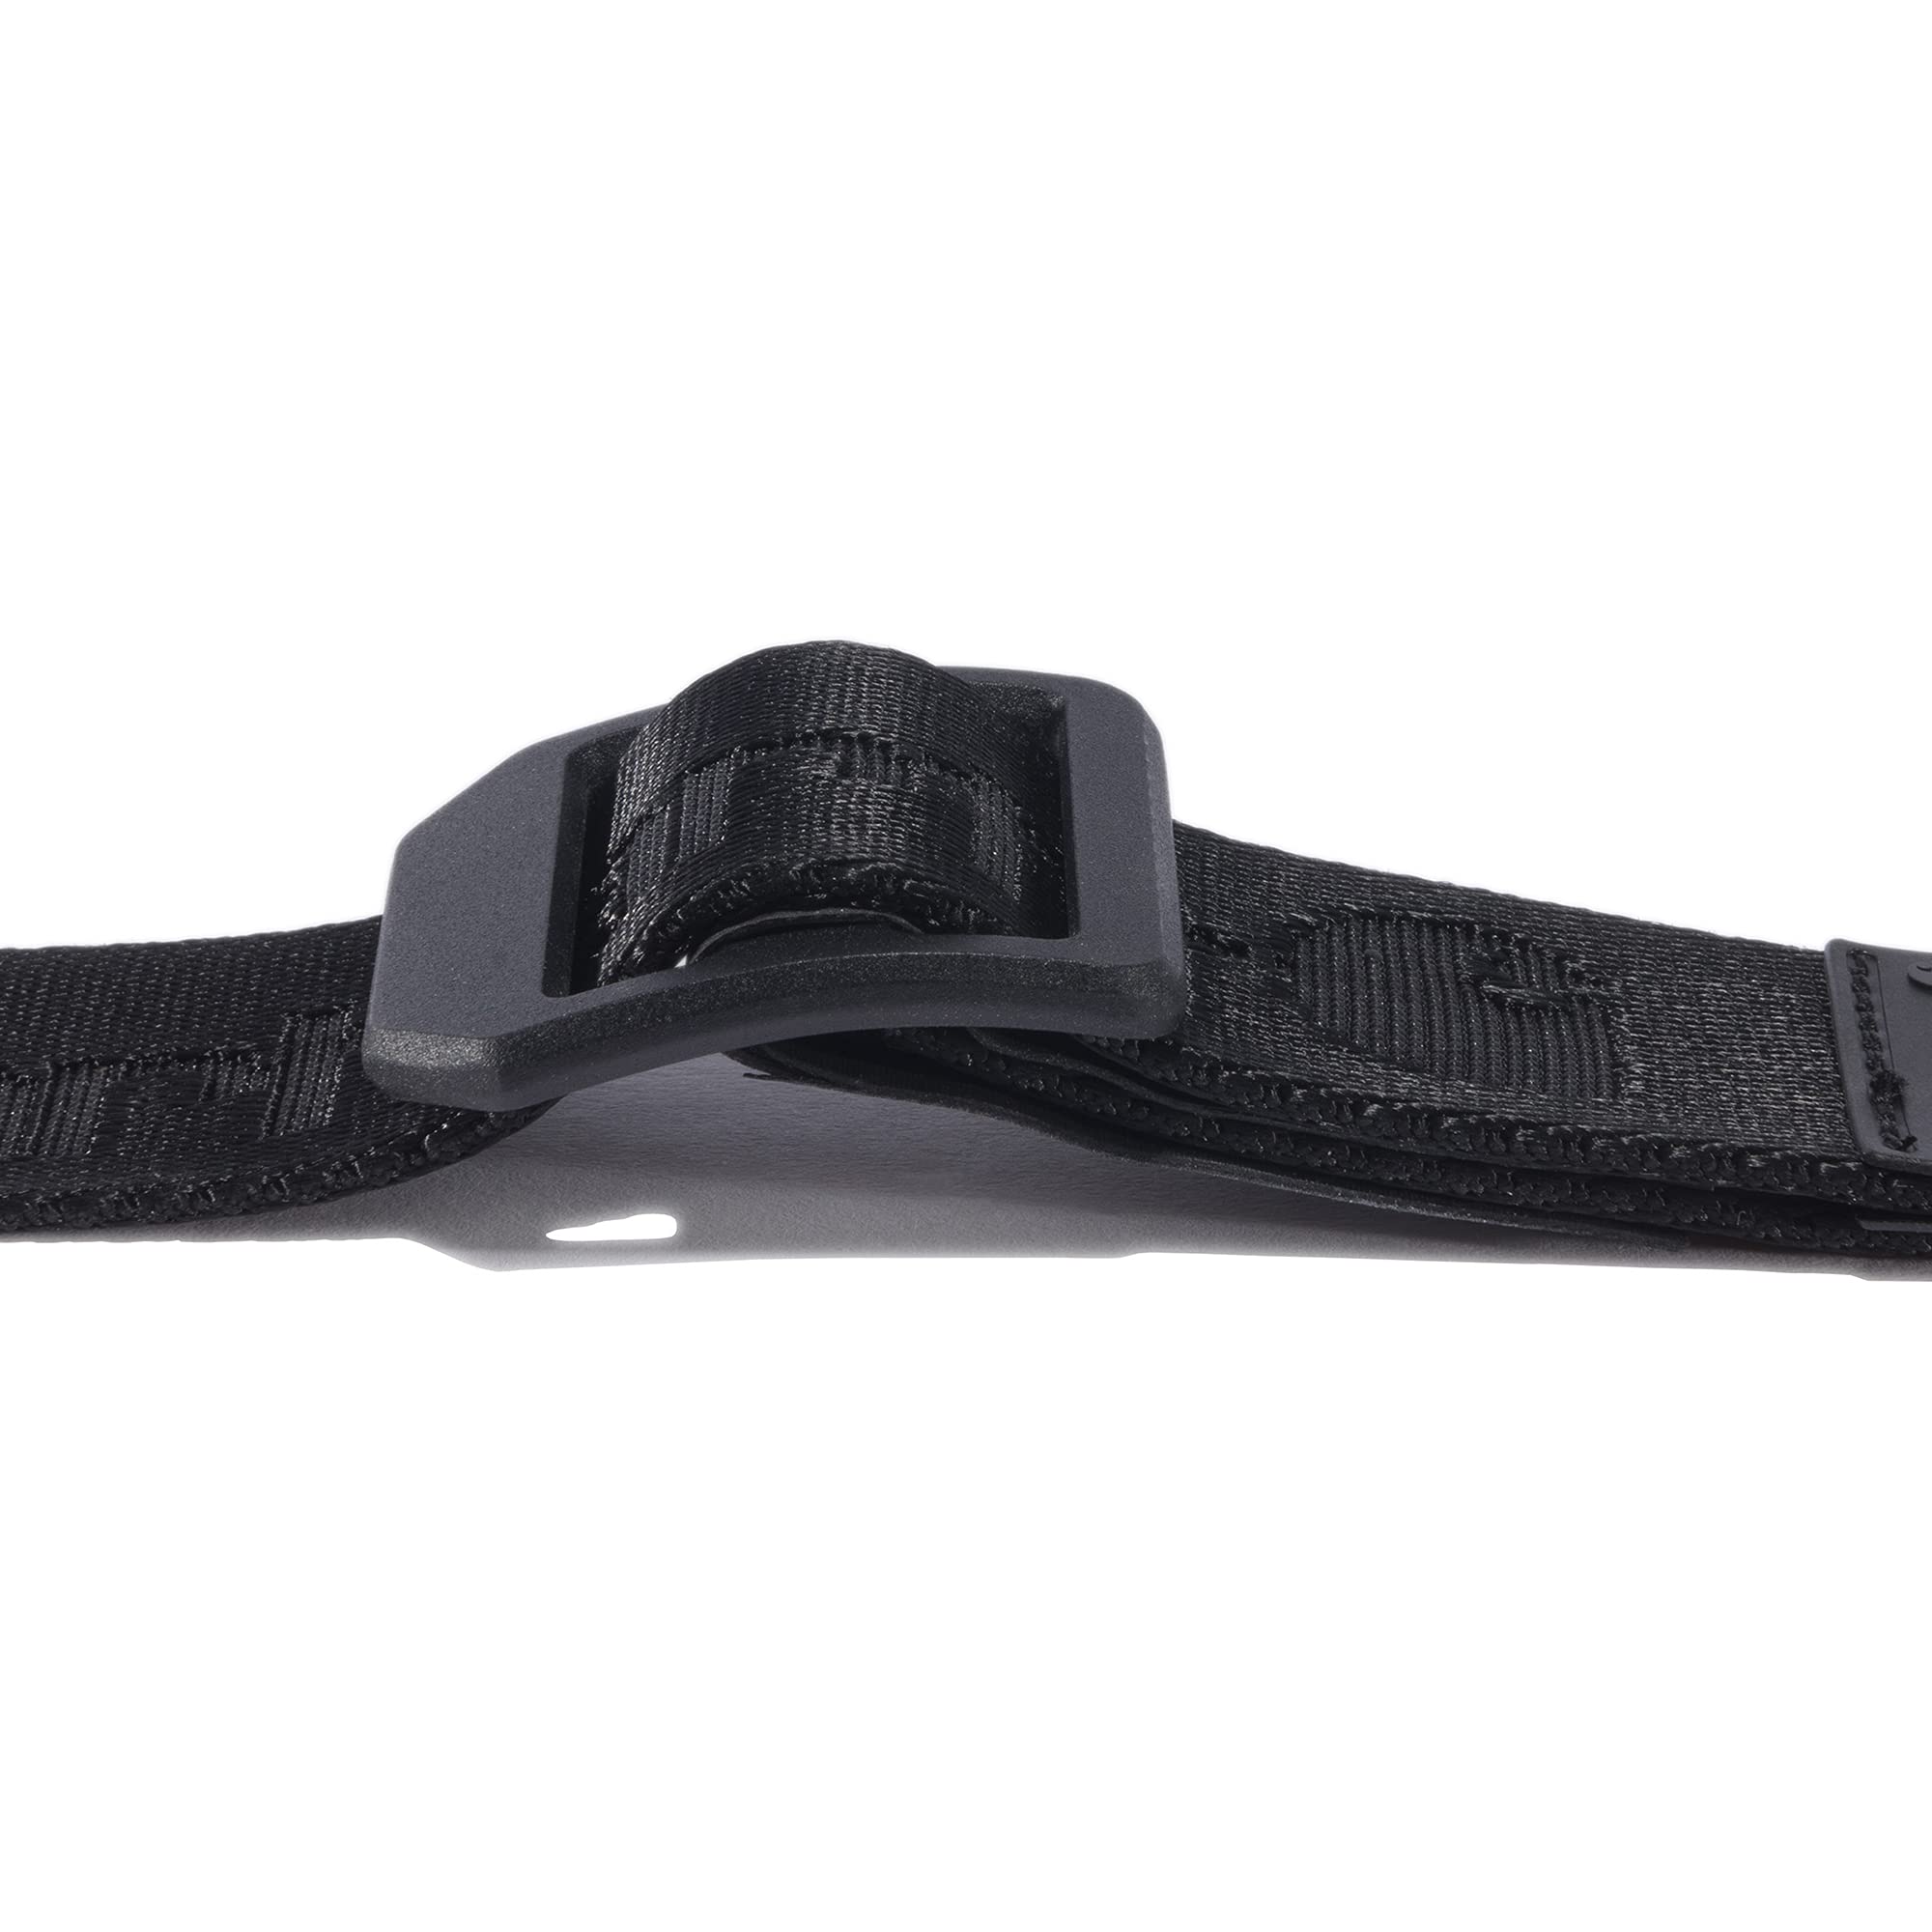 Carhartt Men's Casual Nylon Webbing Belts, Available in Multiple Styles, Colors & Sizes